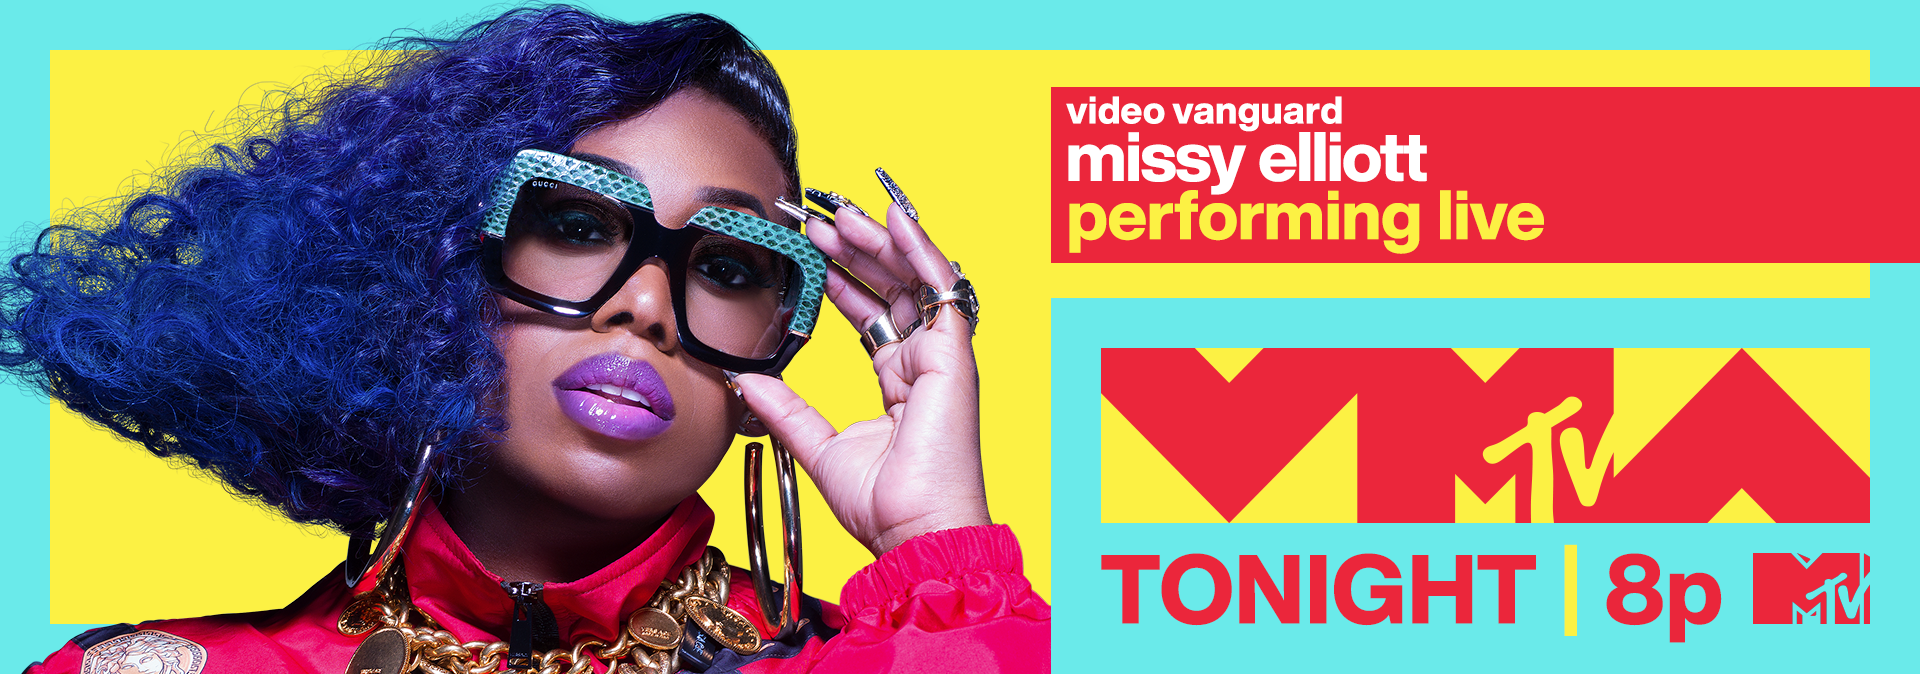 VMA-TaxiTop-Missy-Tonight.png